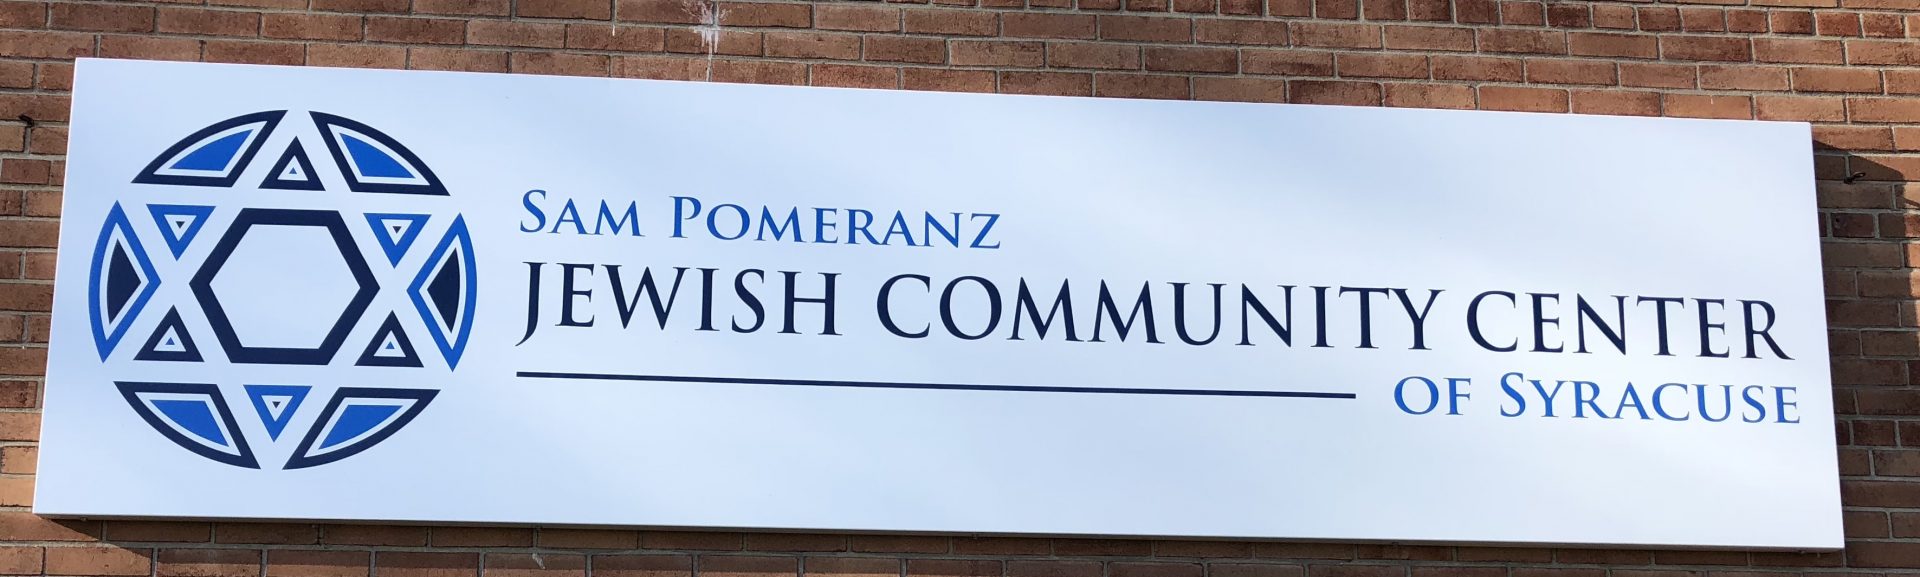 A sign that says "Jewish Community Center"